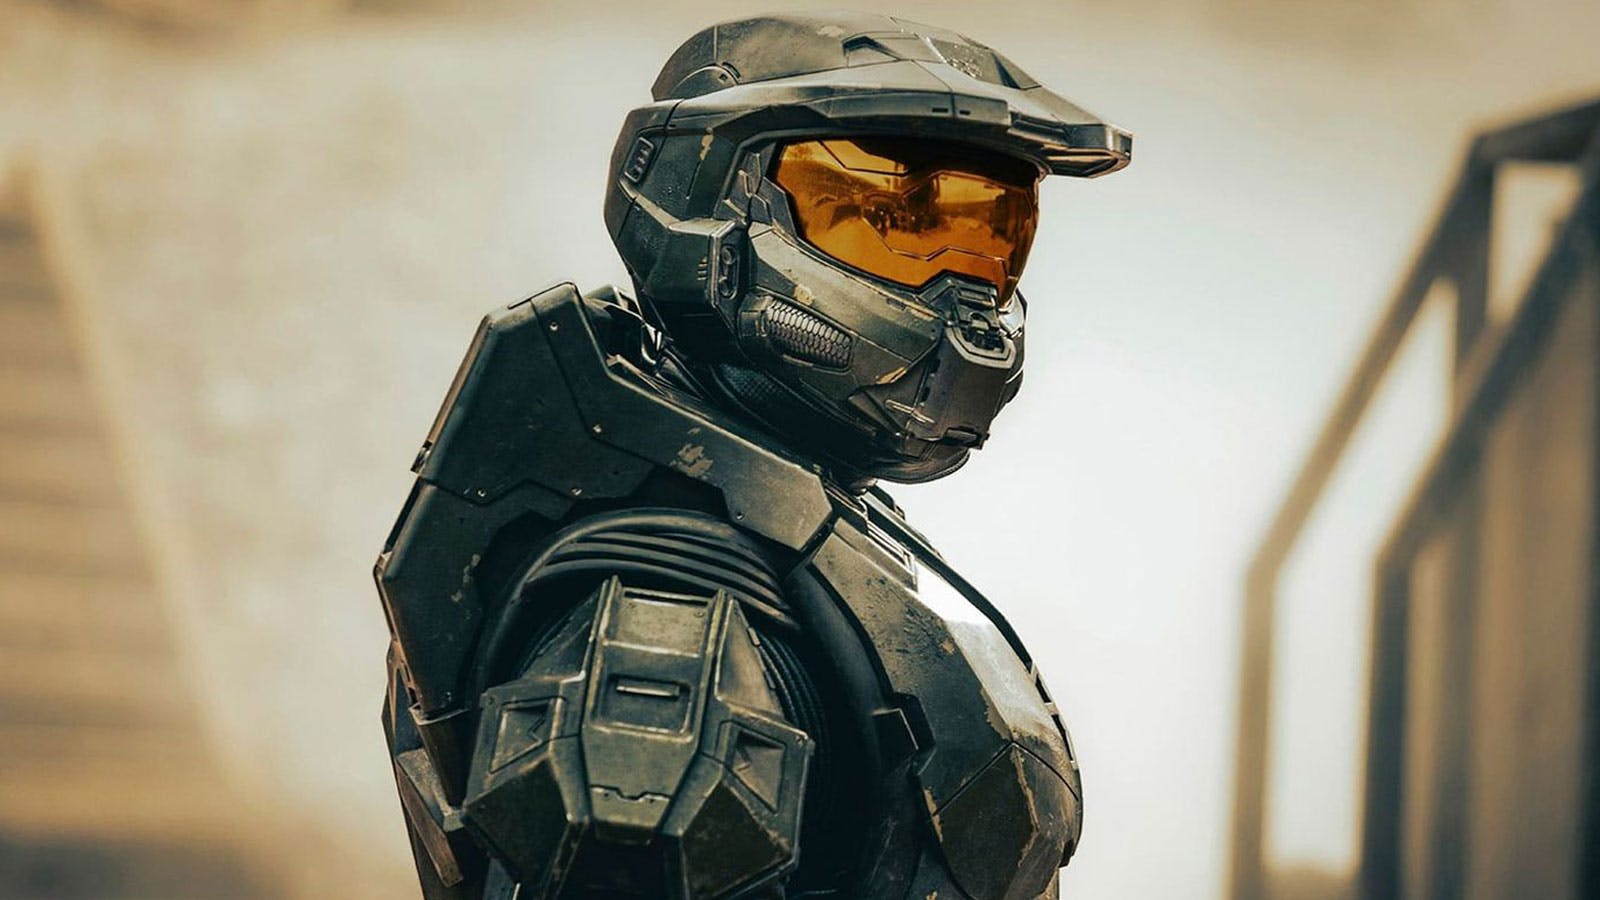 Halo season 1 review: a flood of bold bets and tangled plot points